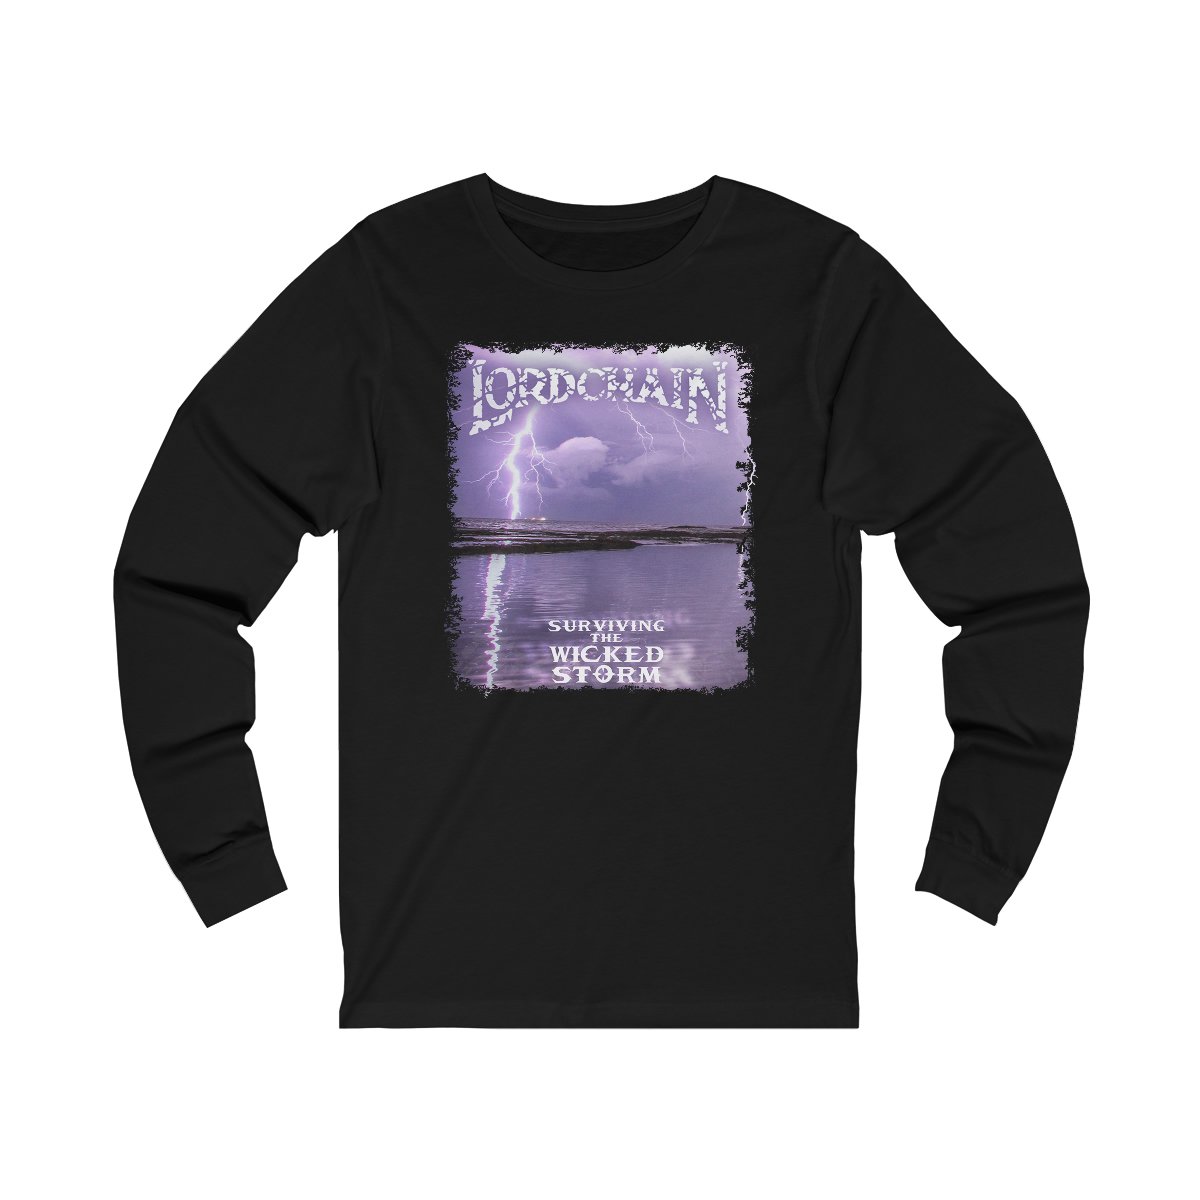 Lordchain – Surviving The Wicked Storm Long Sleeve Tshirt 3501